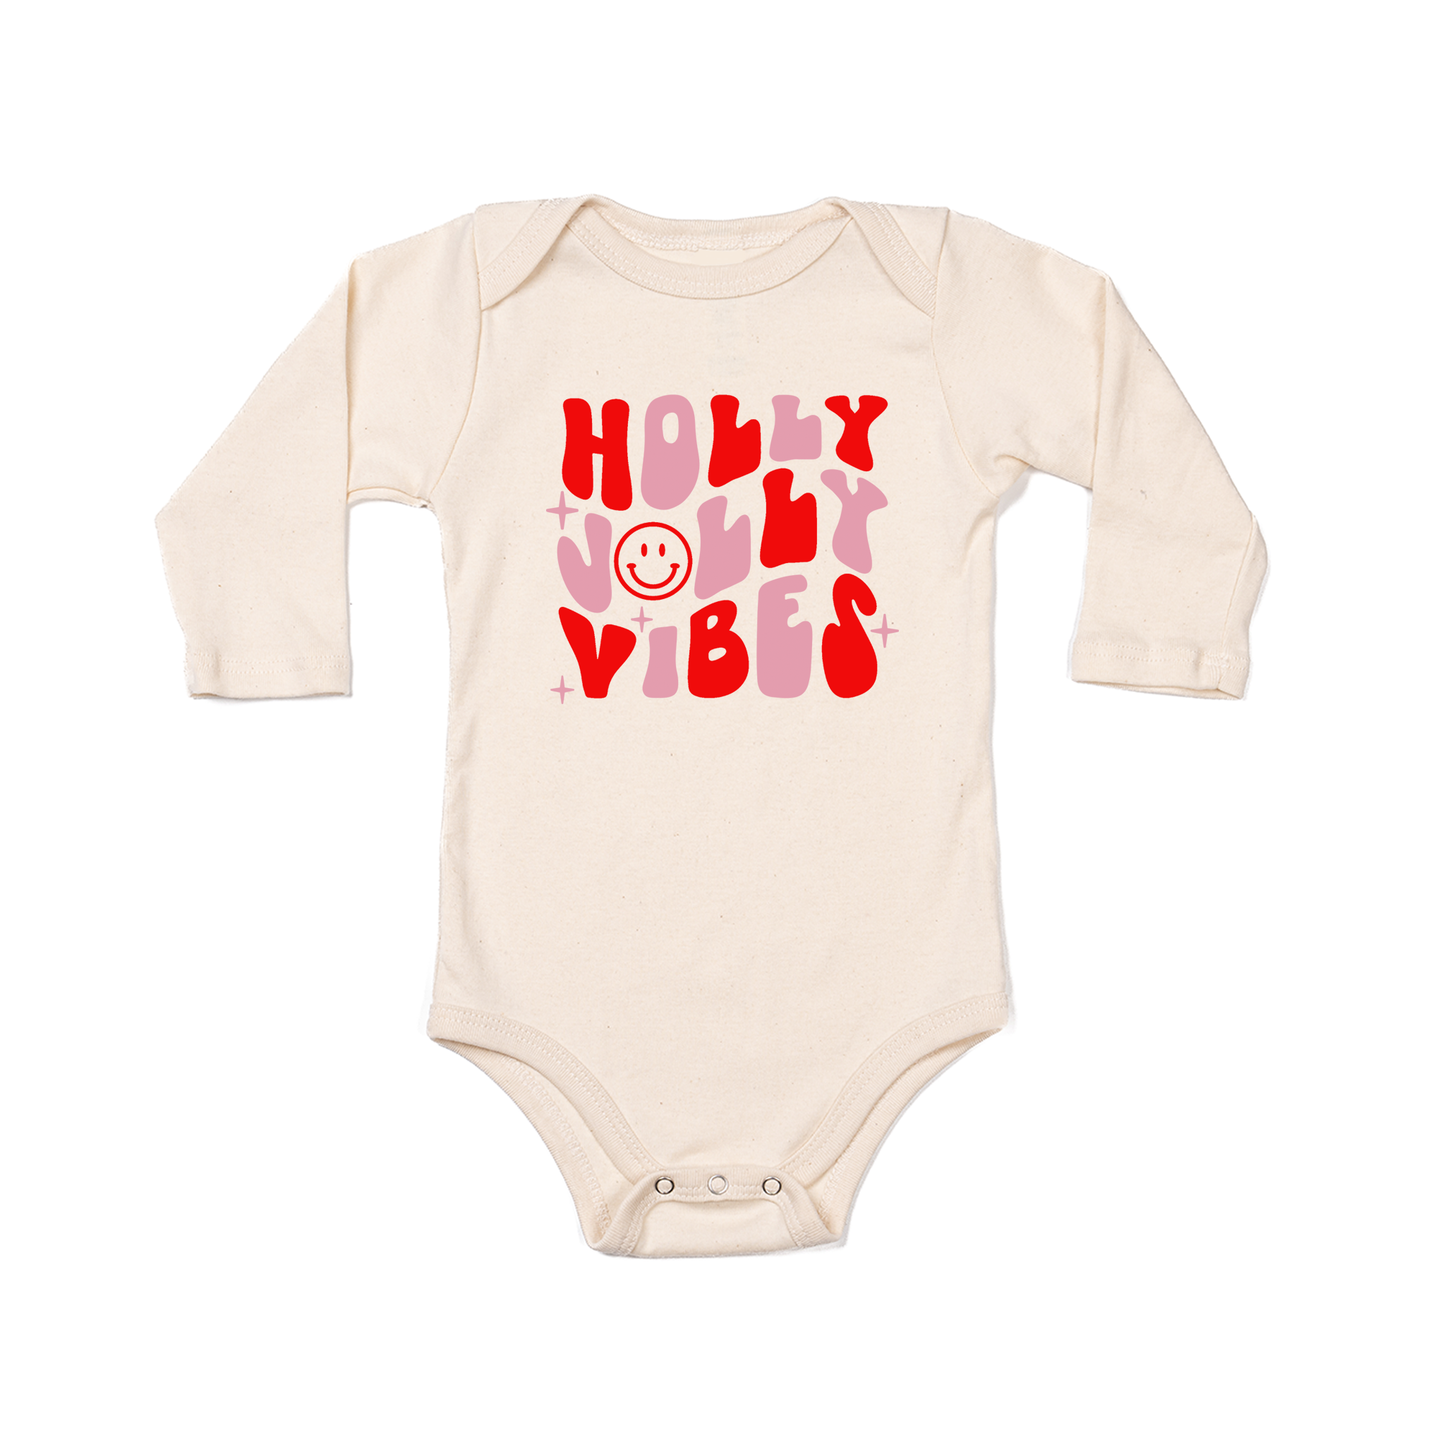 Holly Jolly Vibes - Bodysuit (Natural, Long Sleeve)